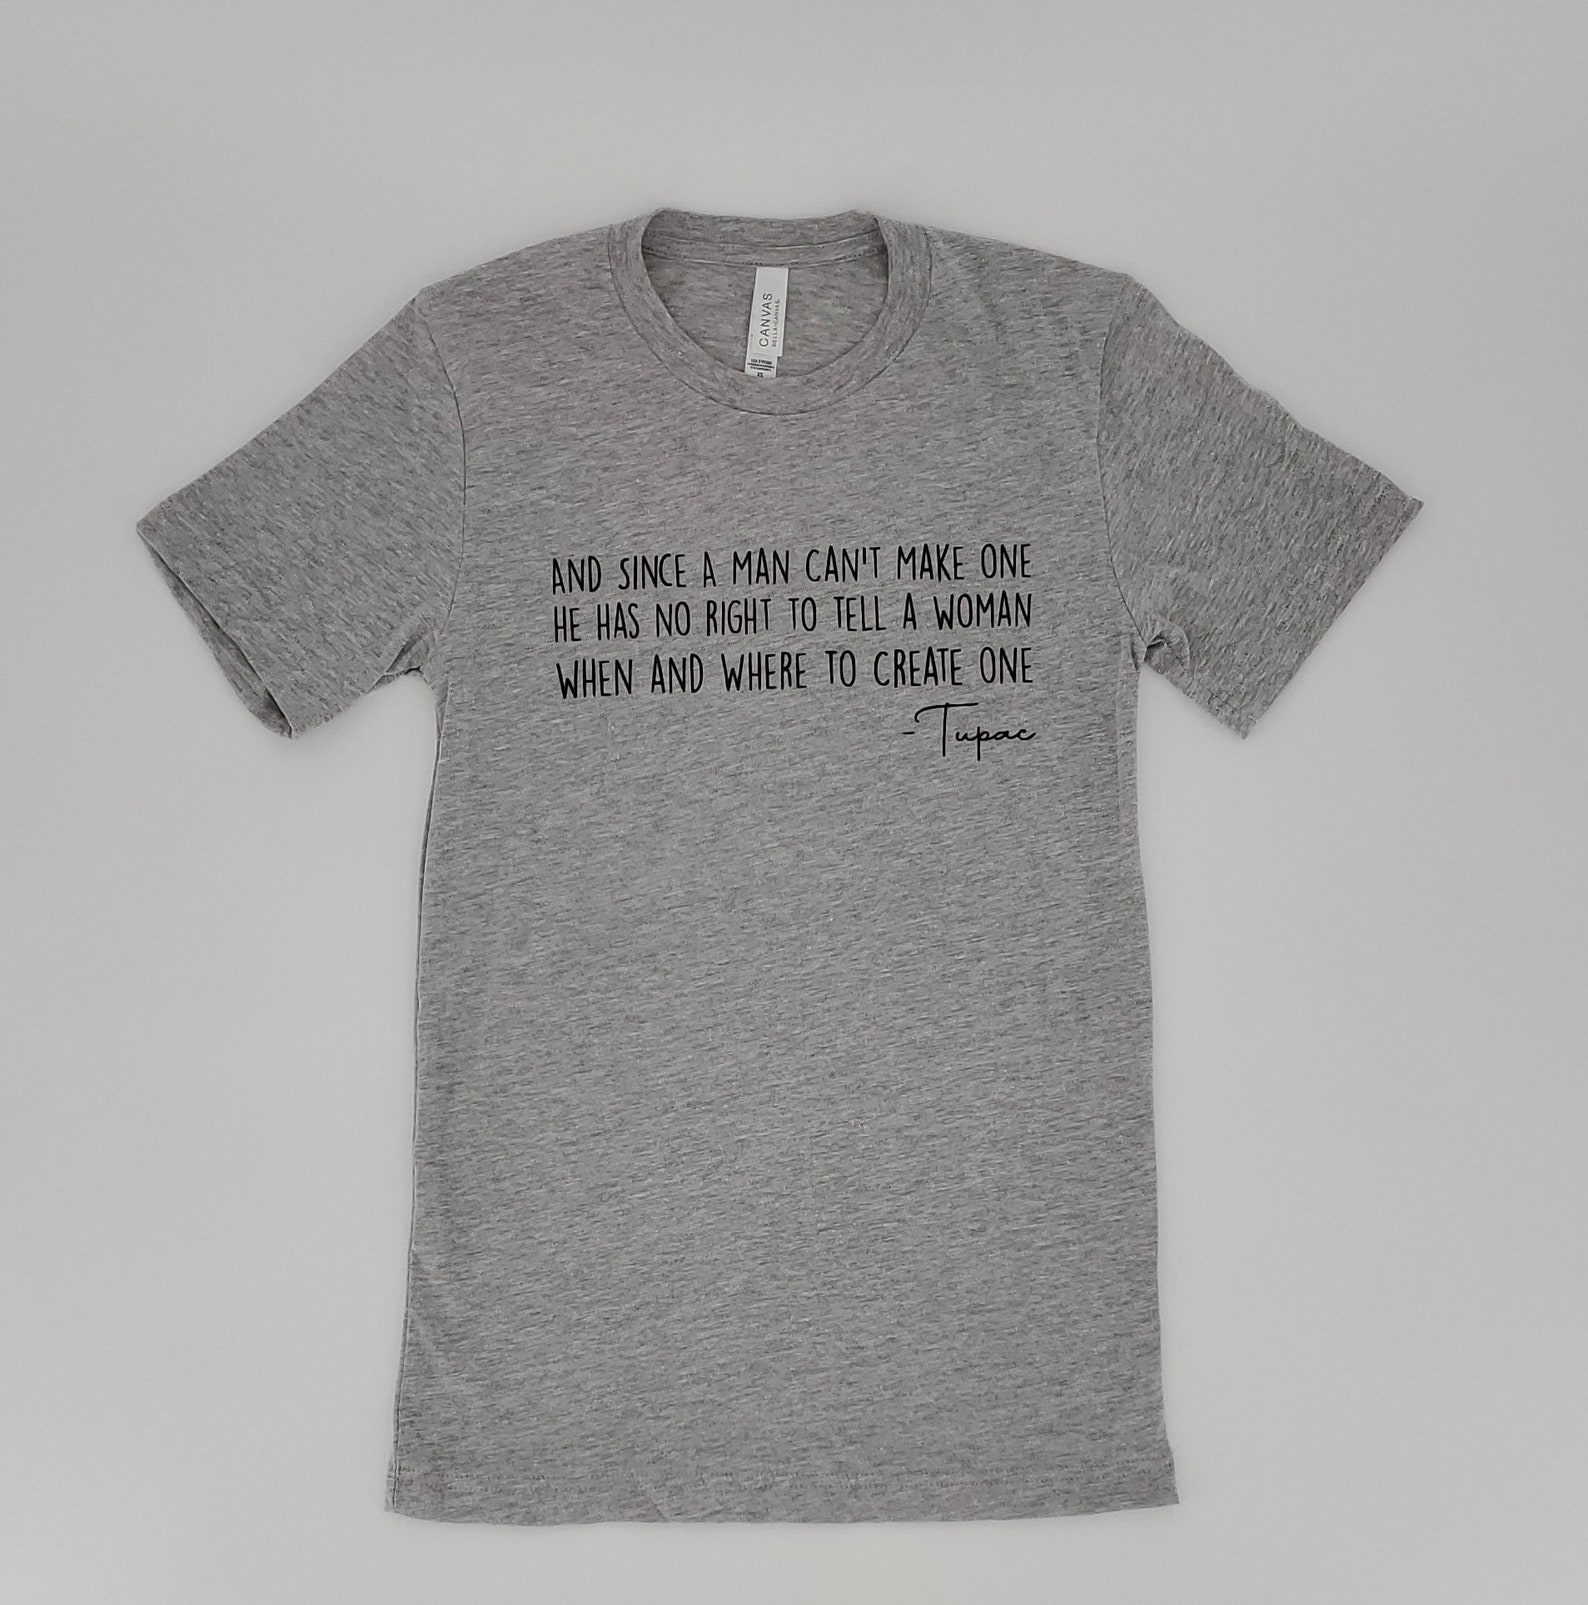 Tupac Quote Shirt Women's Rights - Etsy